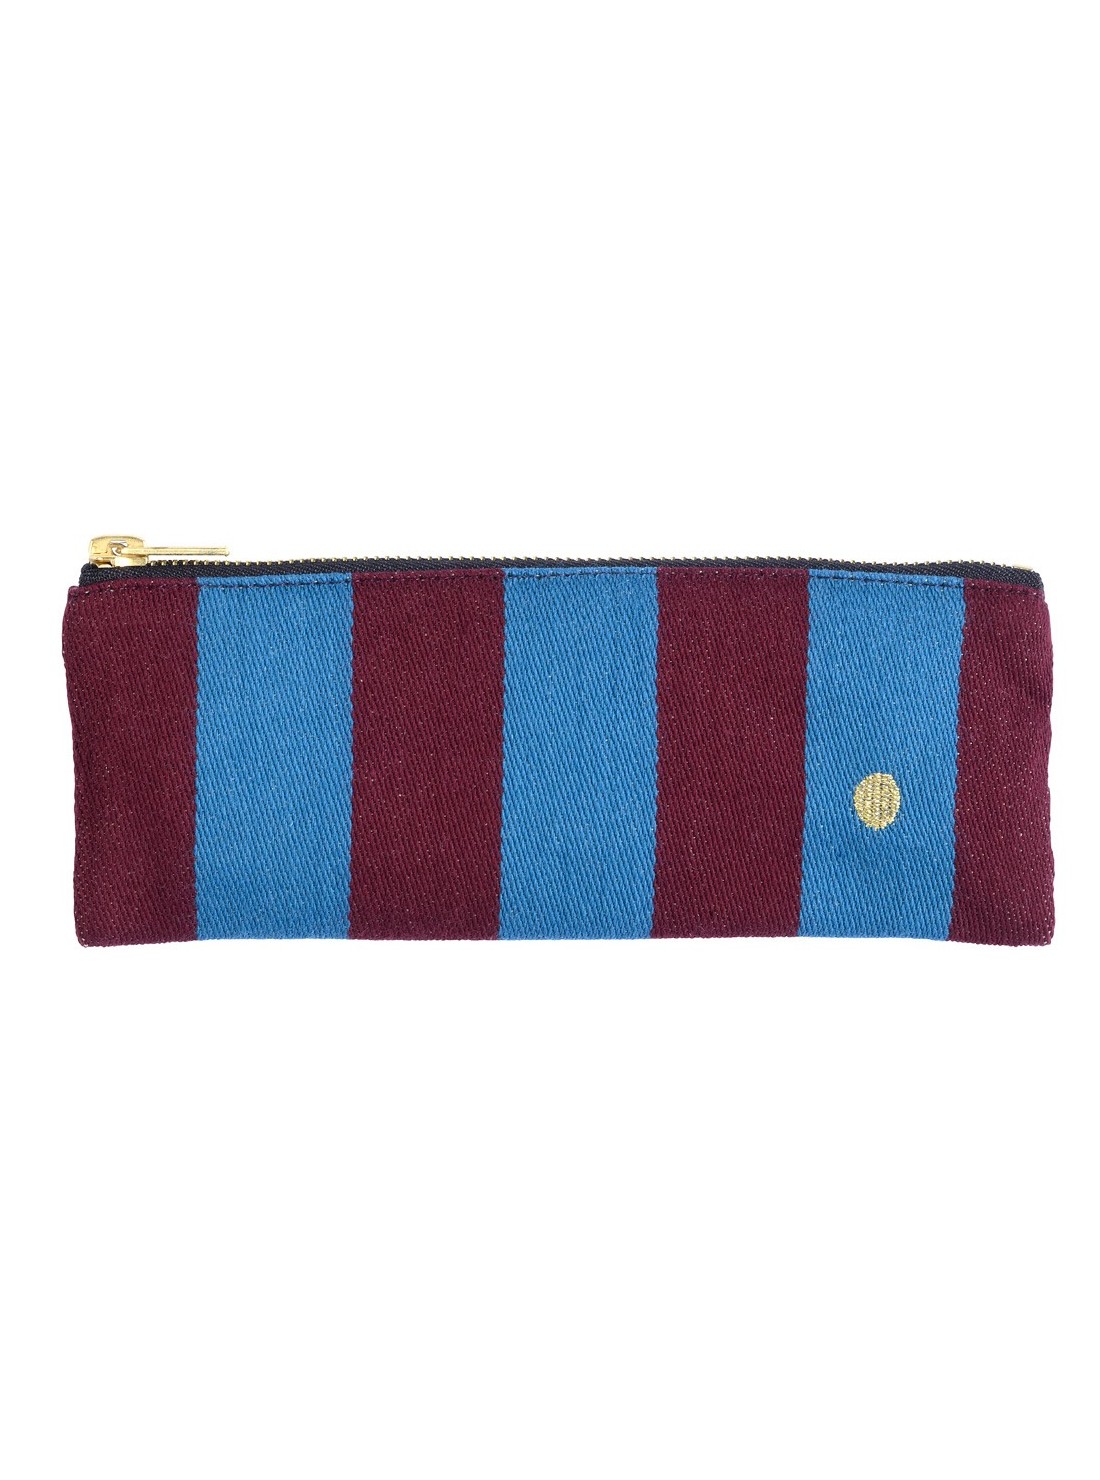 PENCIL POUCH HARRY BERRY